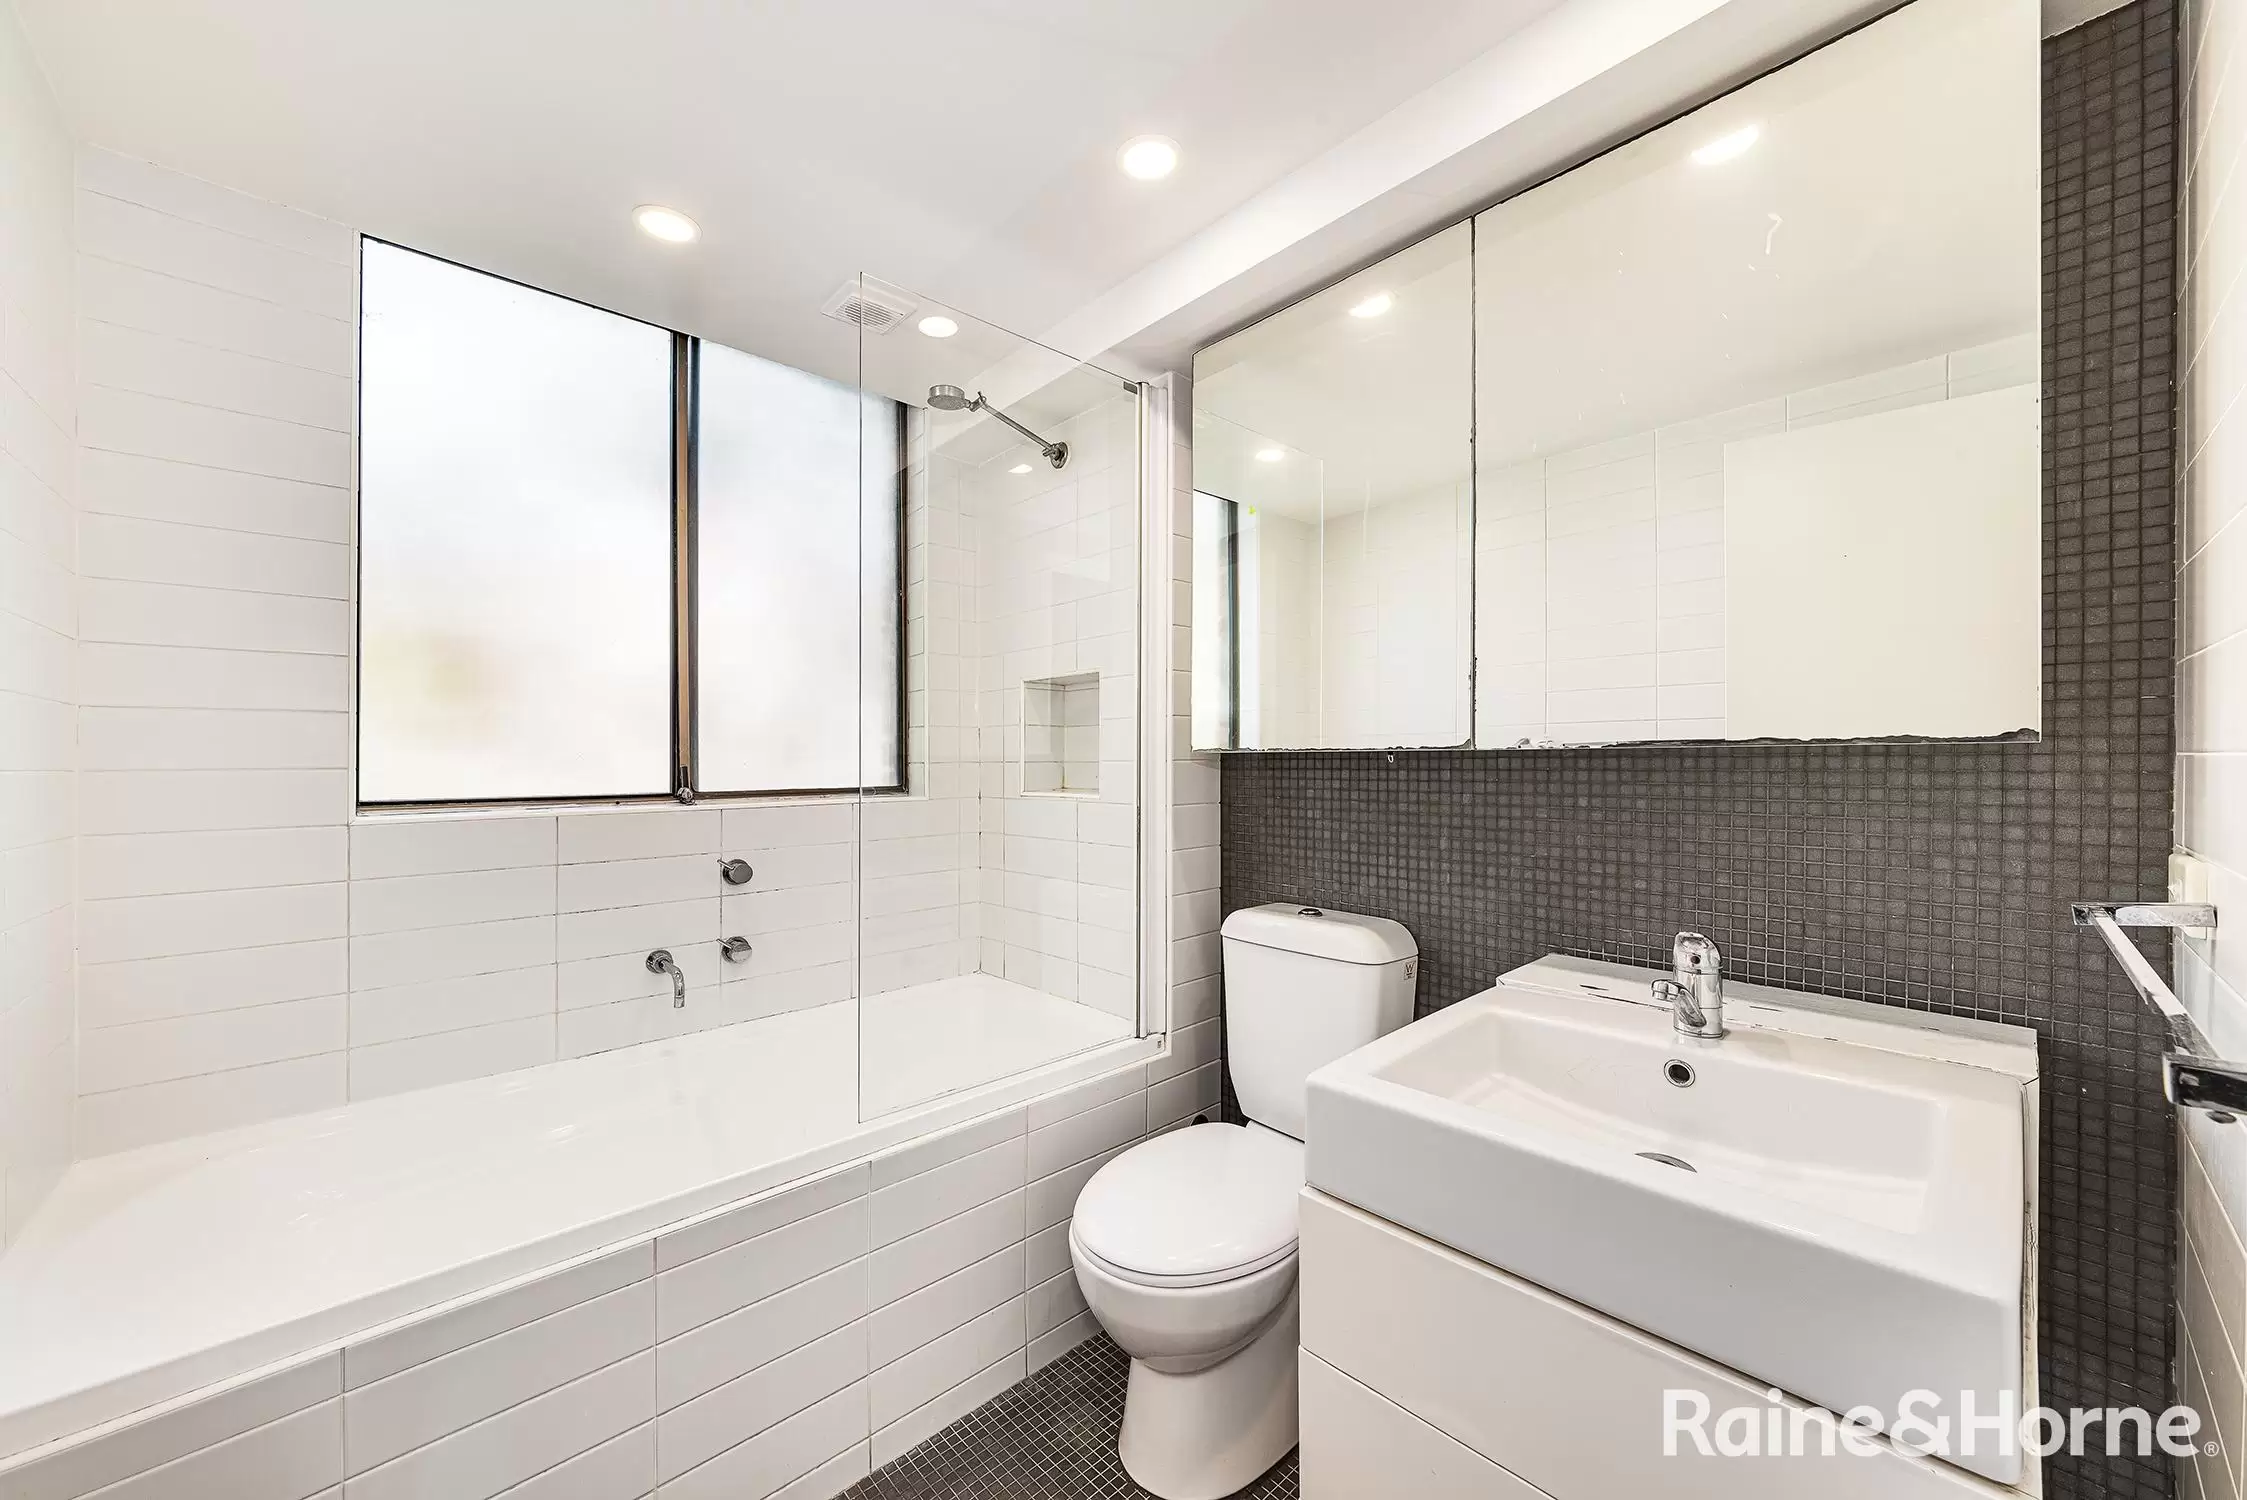 6/84 Melody Street, Coogee For Lease by Raine & Horne Randwick | Coogee - image 4